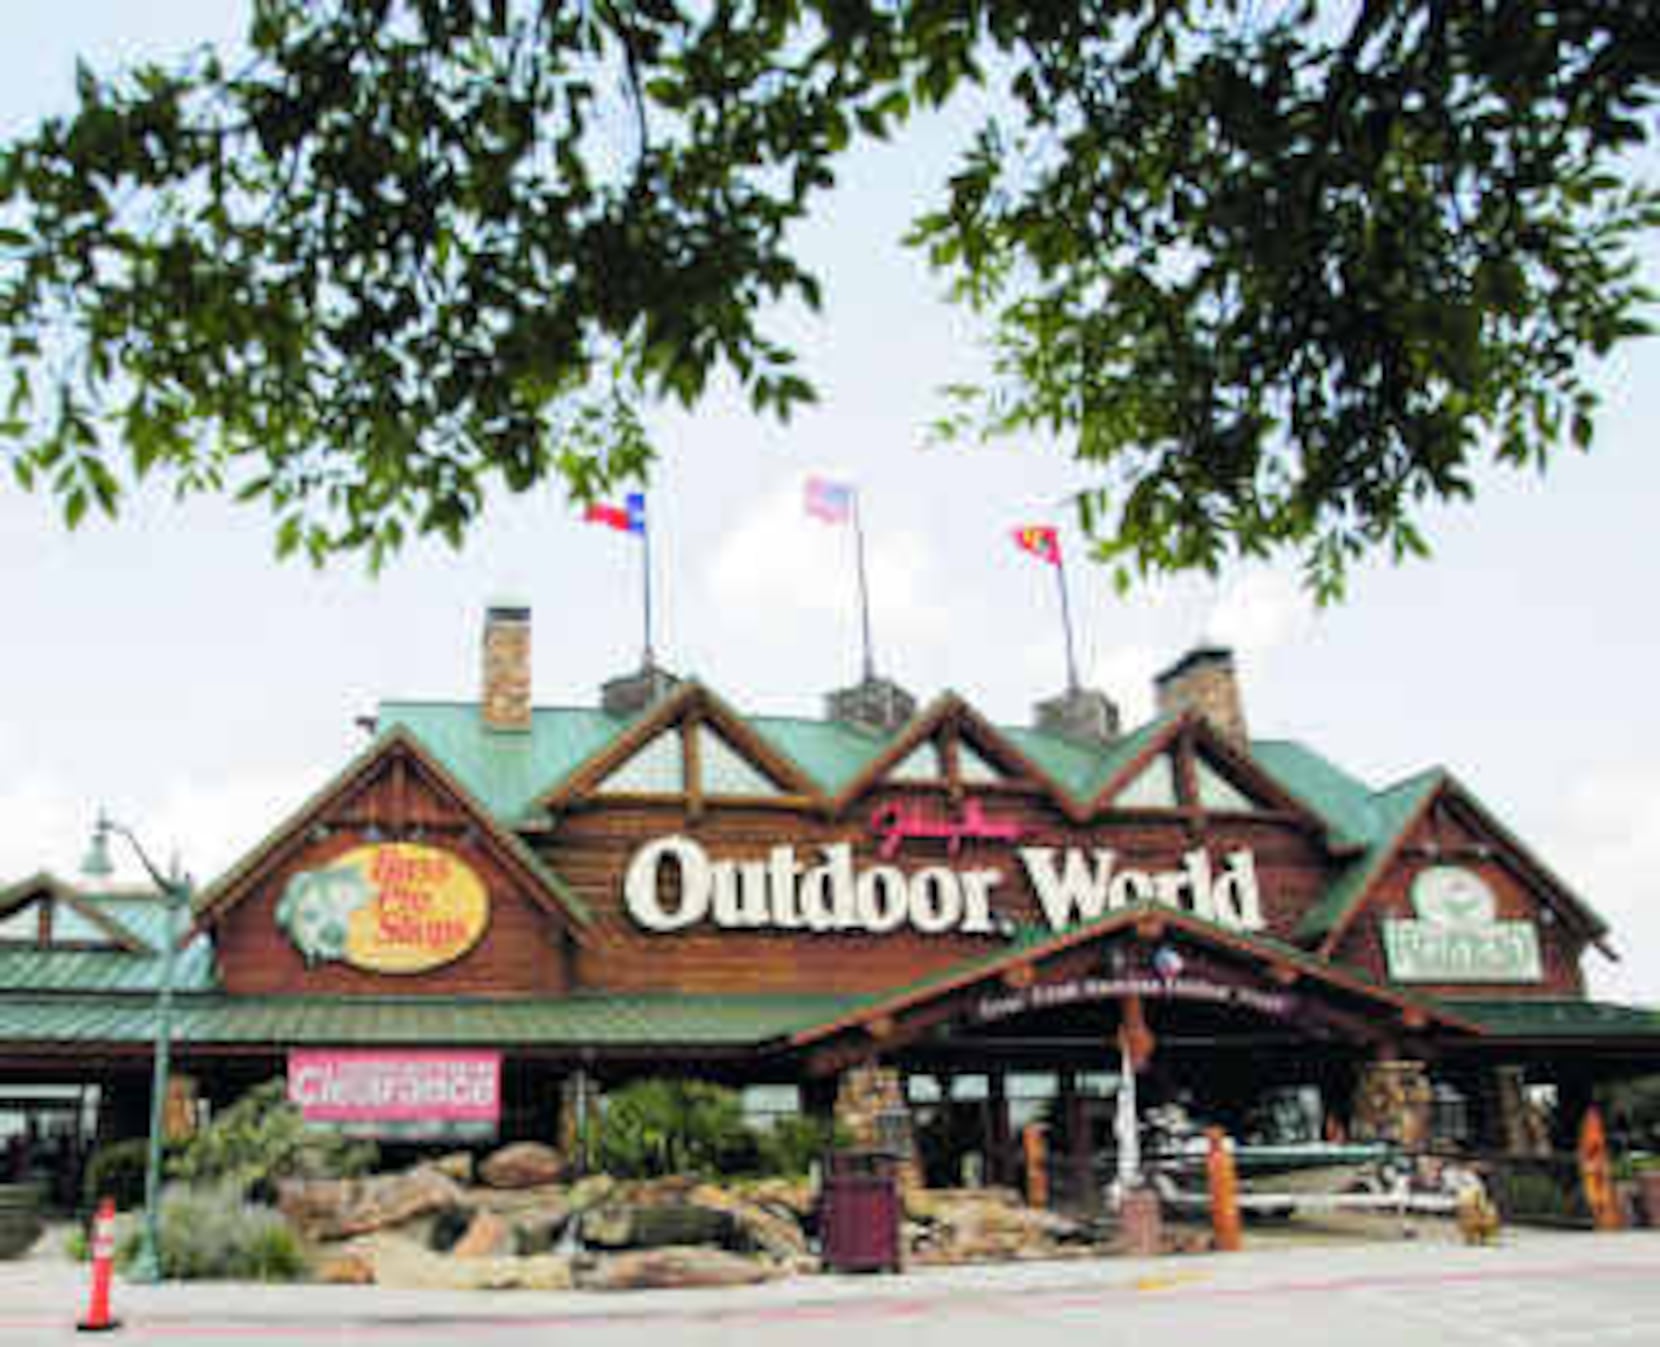 Grand Prairie's SH 161 is getting a Bass Pro Shops and Andretti